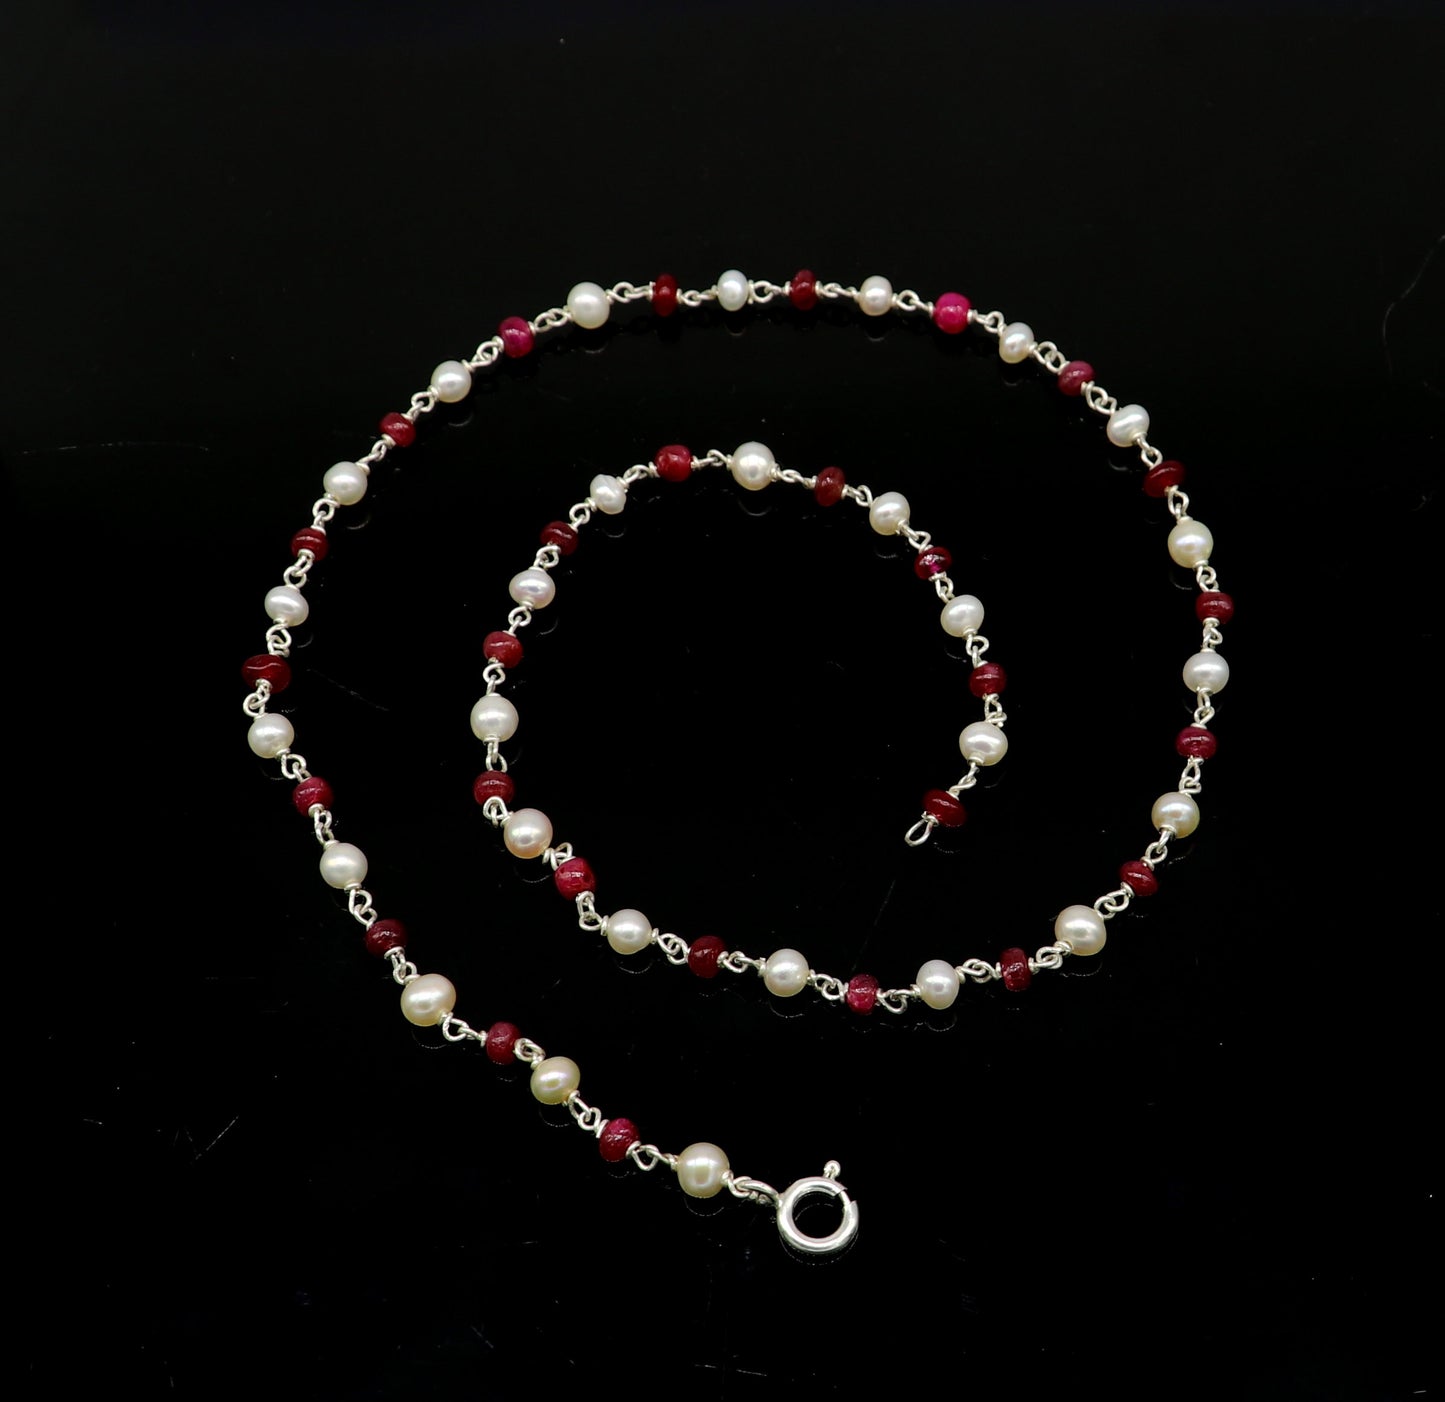 Elegant pearl and red stone custom made 925 sterling silver 16" long beaded necklace, gorgeous girl's women's daily use best gifting ch100 - TRIBAL ORNAMENTS